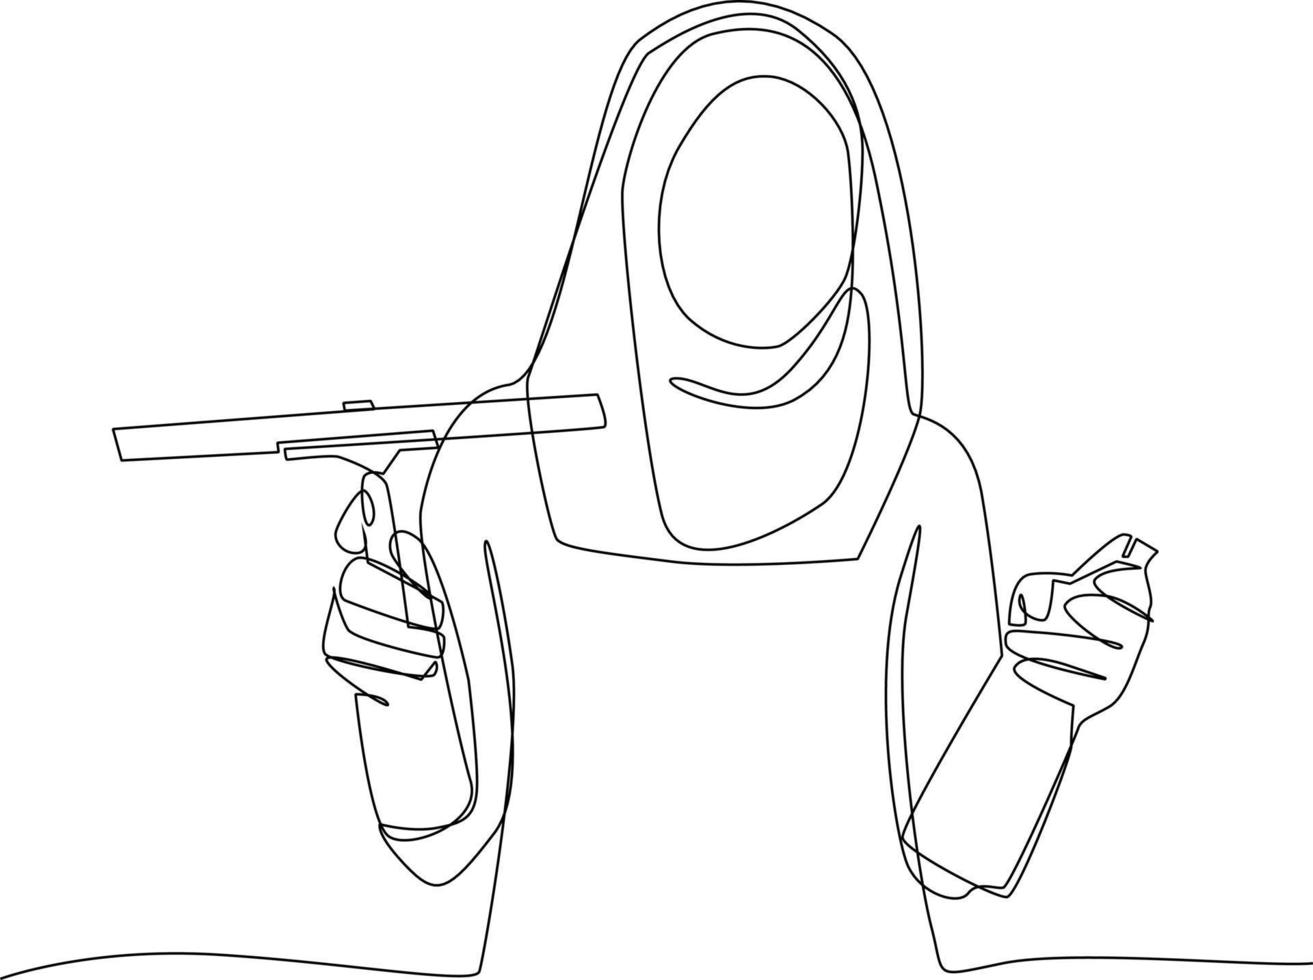 Continuous one line drawing happy Muslim woman cleaning in house. Concept of home health care activities. Single line draw design vector graphic illustration.